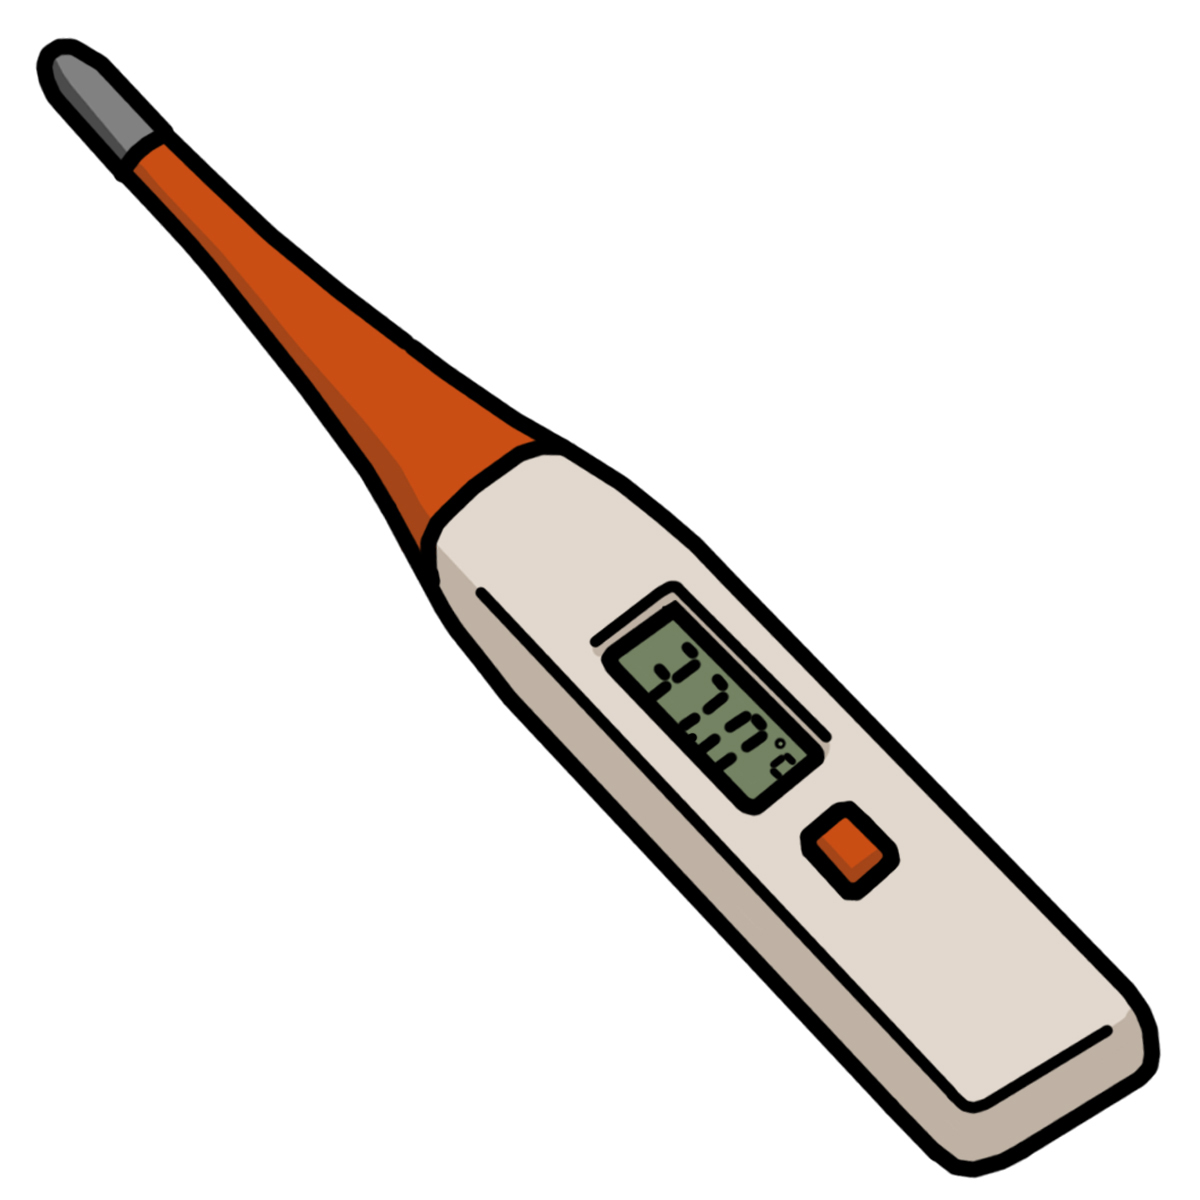 Fever thermometer cliparts.